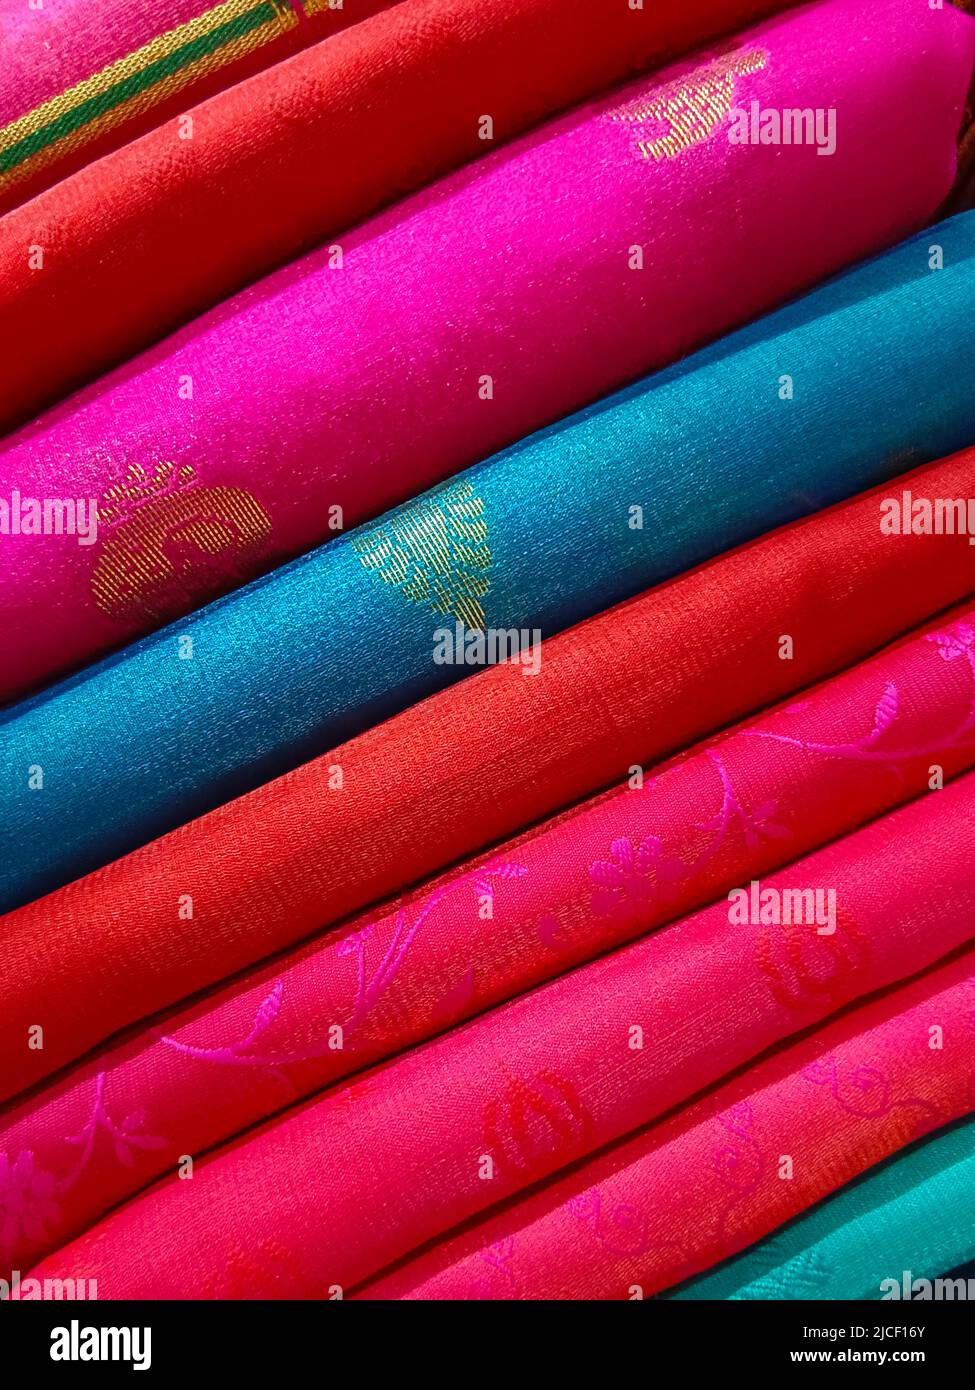 Closeup view of stacked colours saris or sarees in display of Indian retail shop, textile shop. Stock Photo